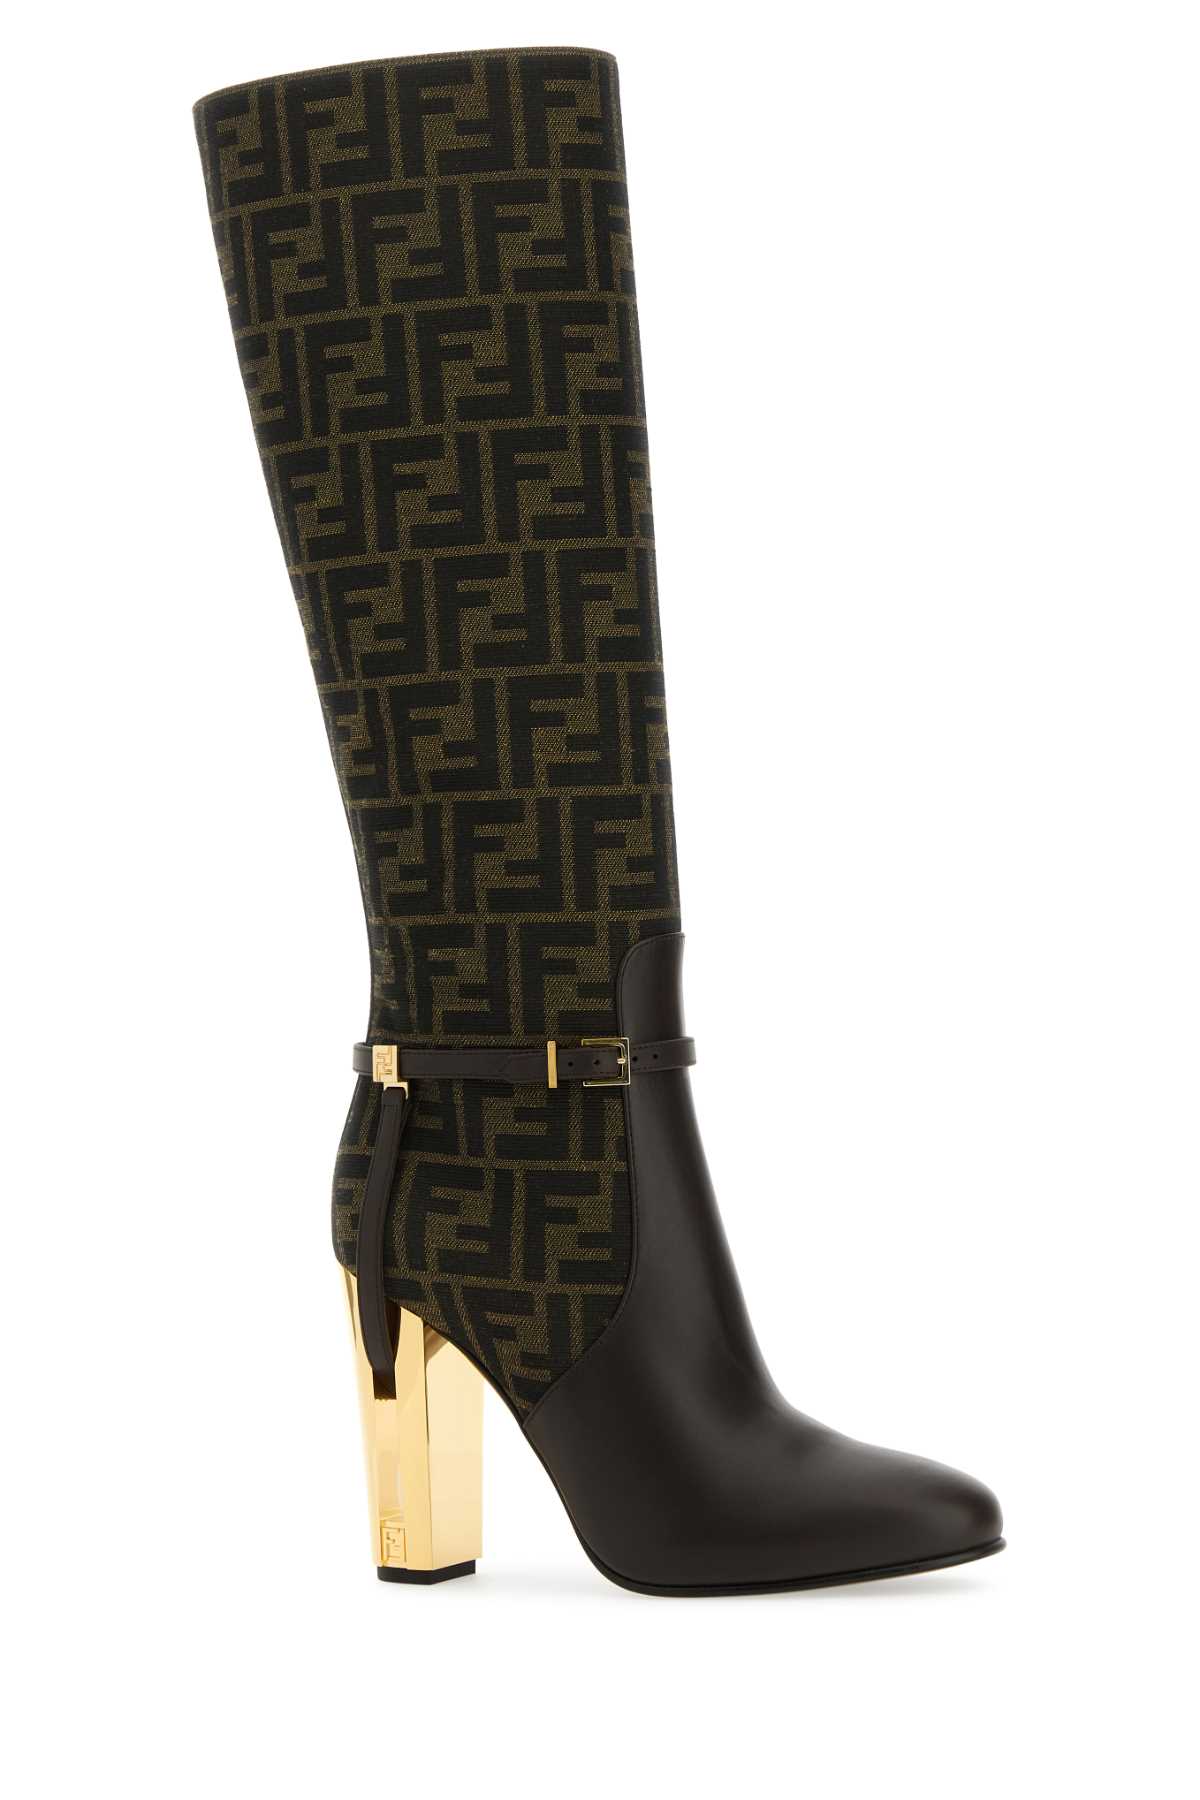 FENDI EMBROIDERED LEATHER AND FABRIC DELFINA BOOTS